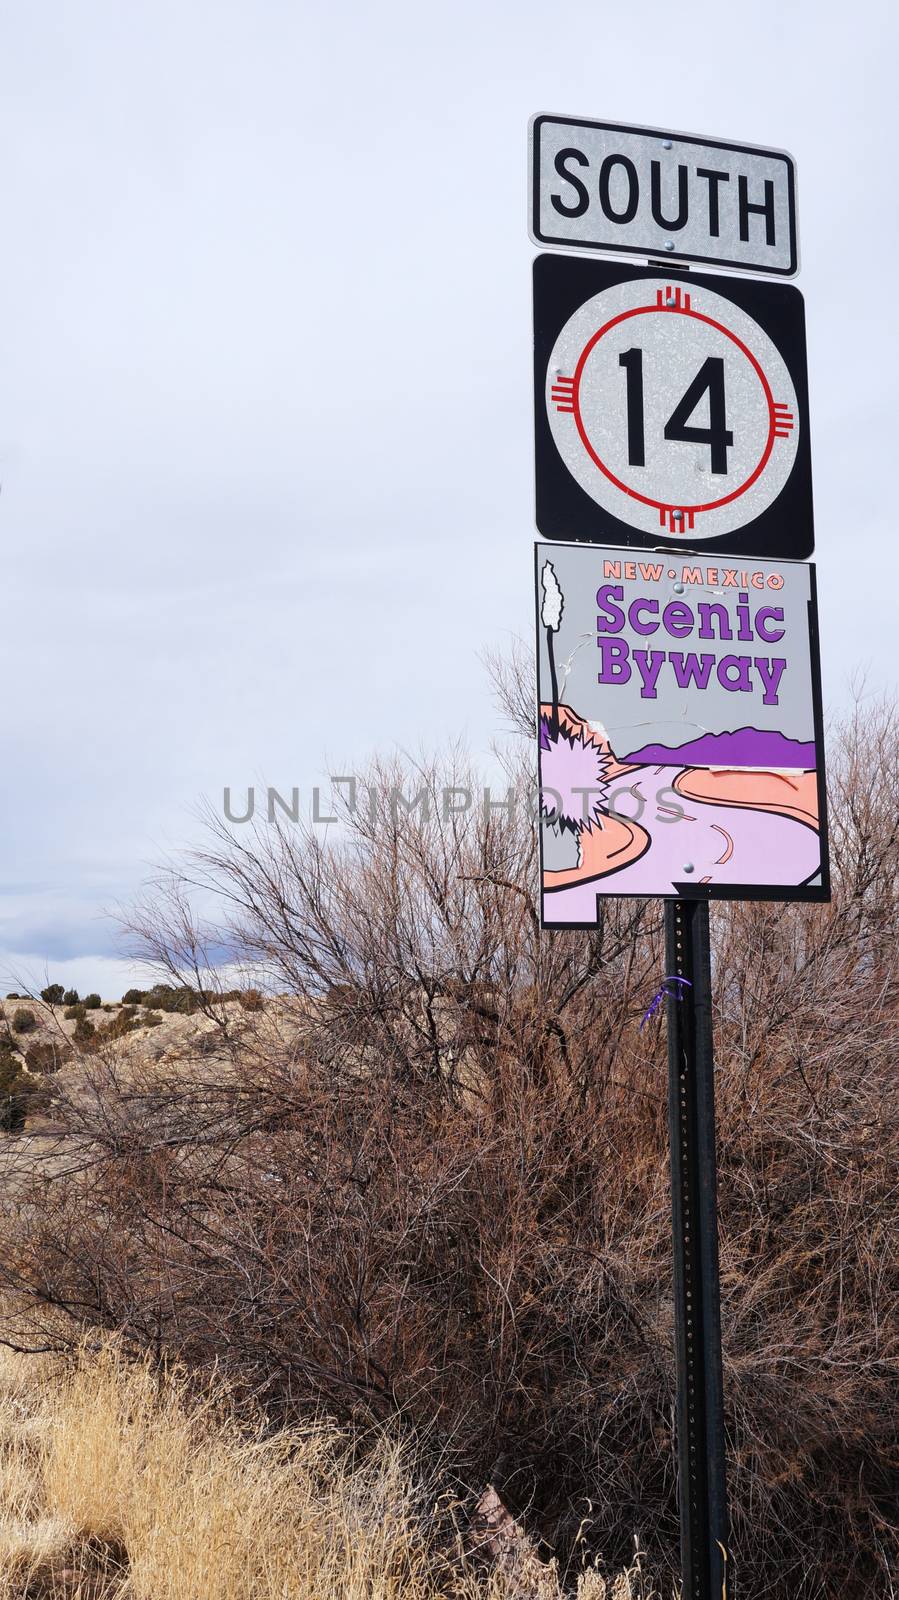 Scenic byway sign in New Mexico, USA